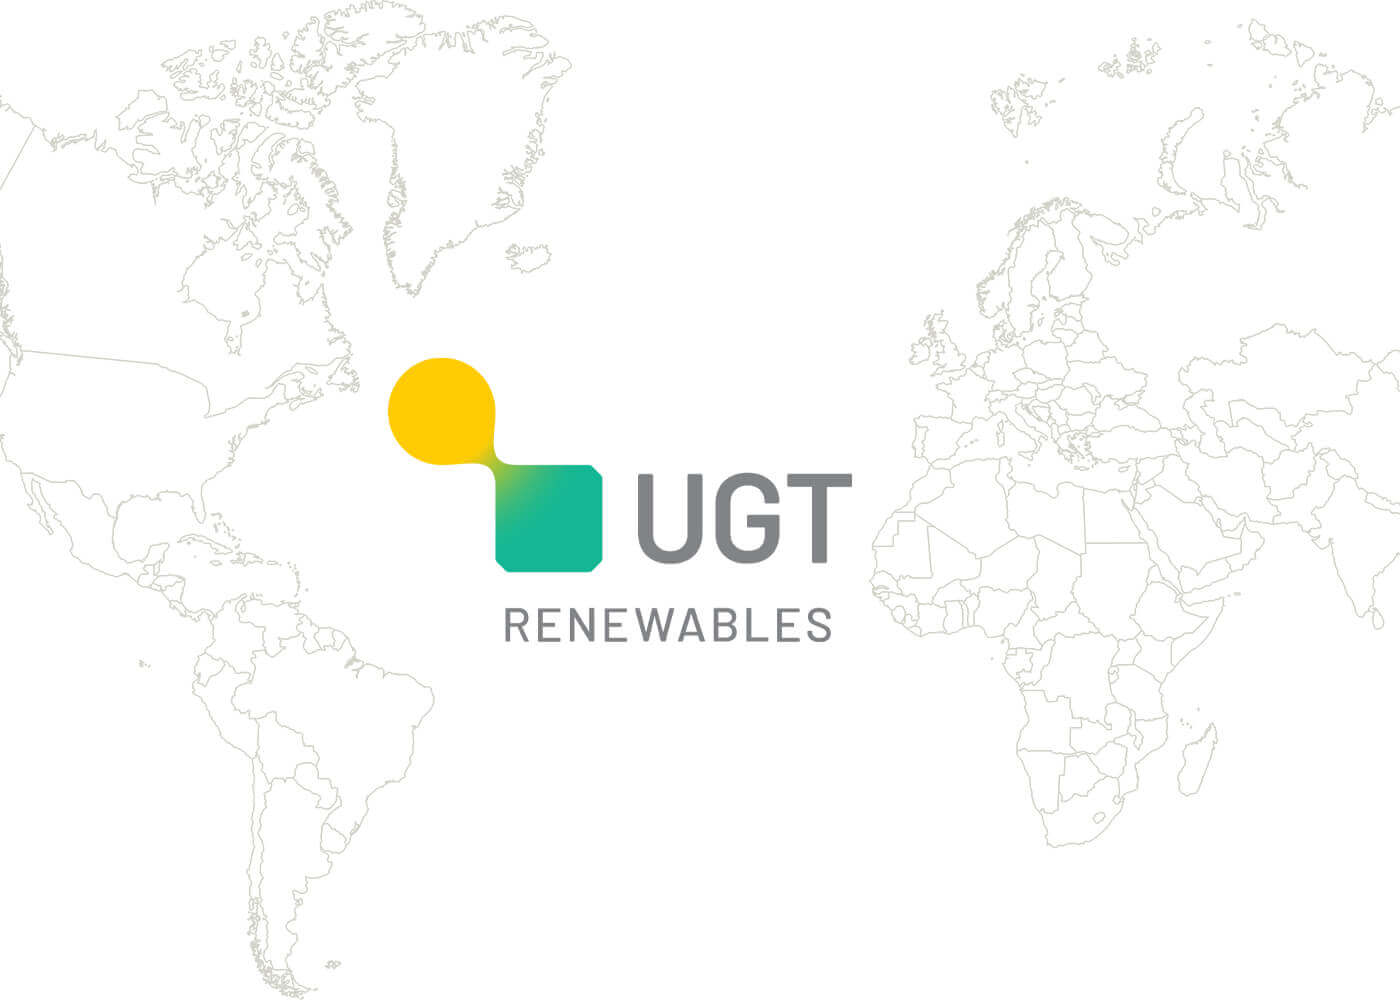 World map centered behind the UGT Renewables logo